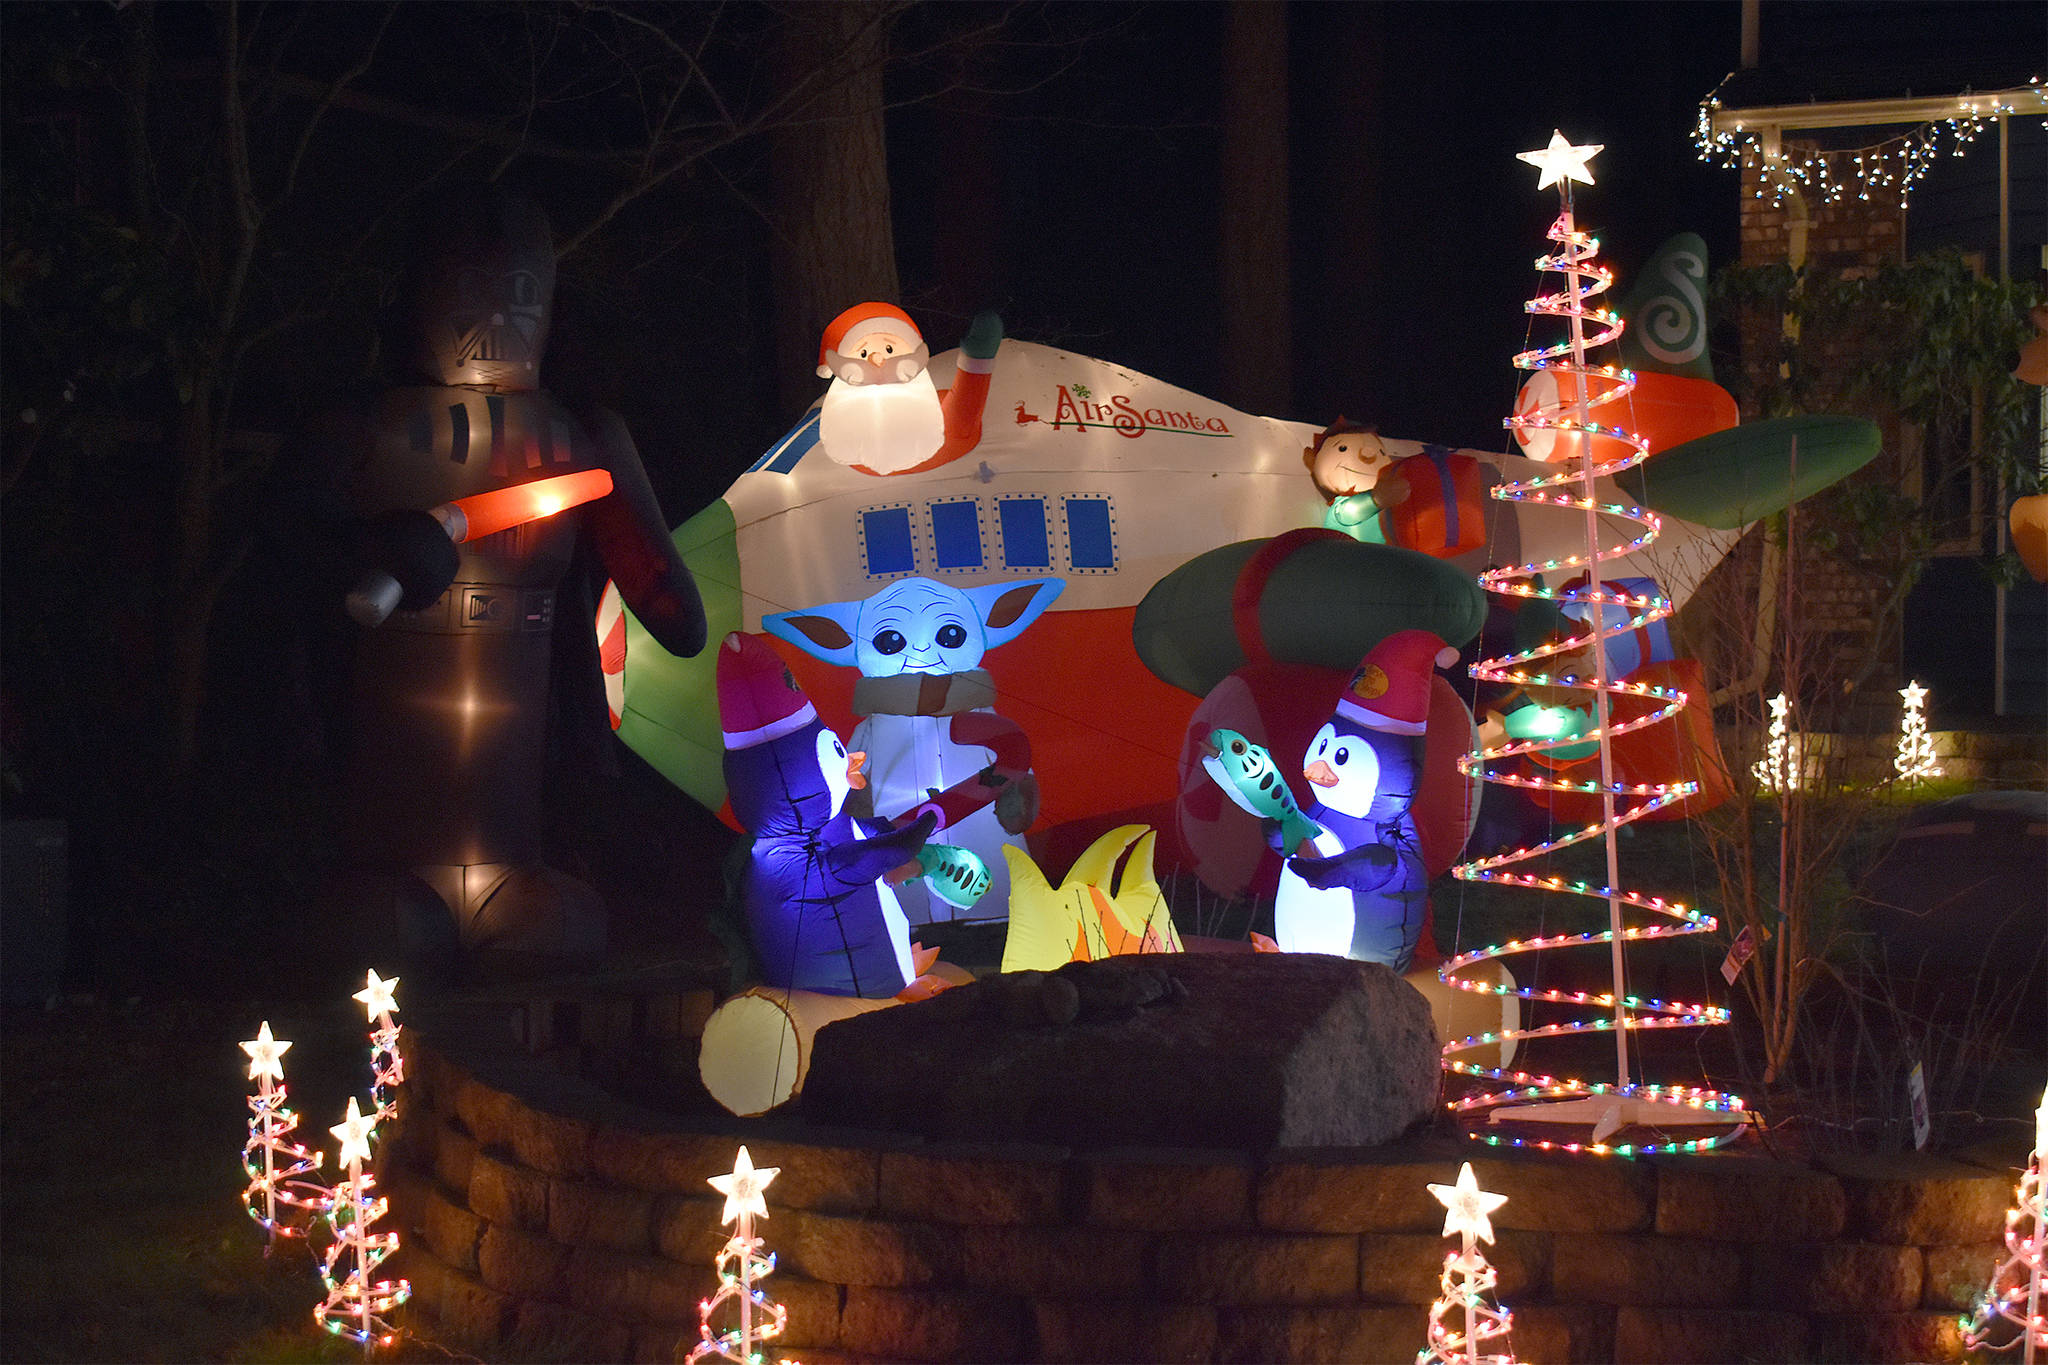 An unexpected pairing of Baby Yoda and Santa in a jet plane are the stars of this home’s Christmas display, located just off of Southwest Swantown Avenue in Oak Harbor. Photo by Emily Gilbert/Whidbey News-Times